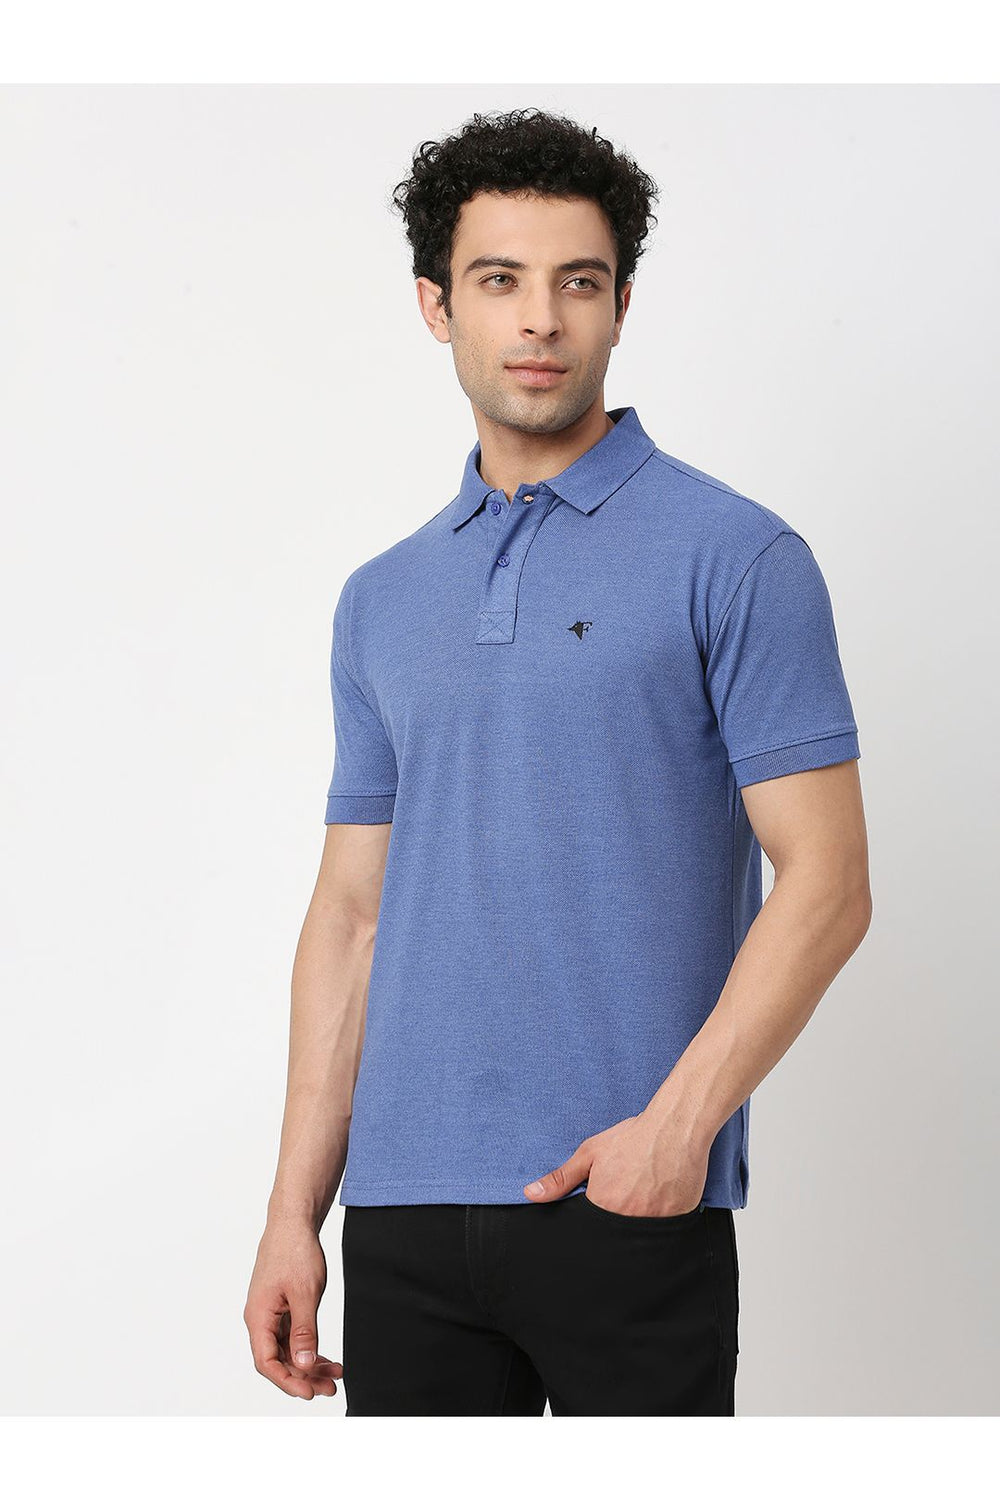 FRENCHIE BLUE MENS POLO T-SHIRT – VIP Inners